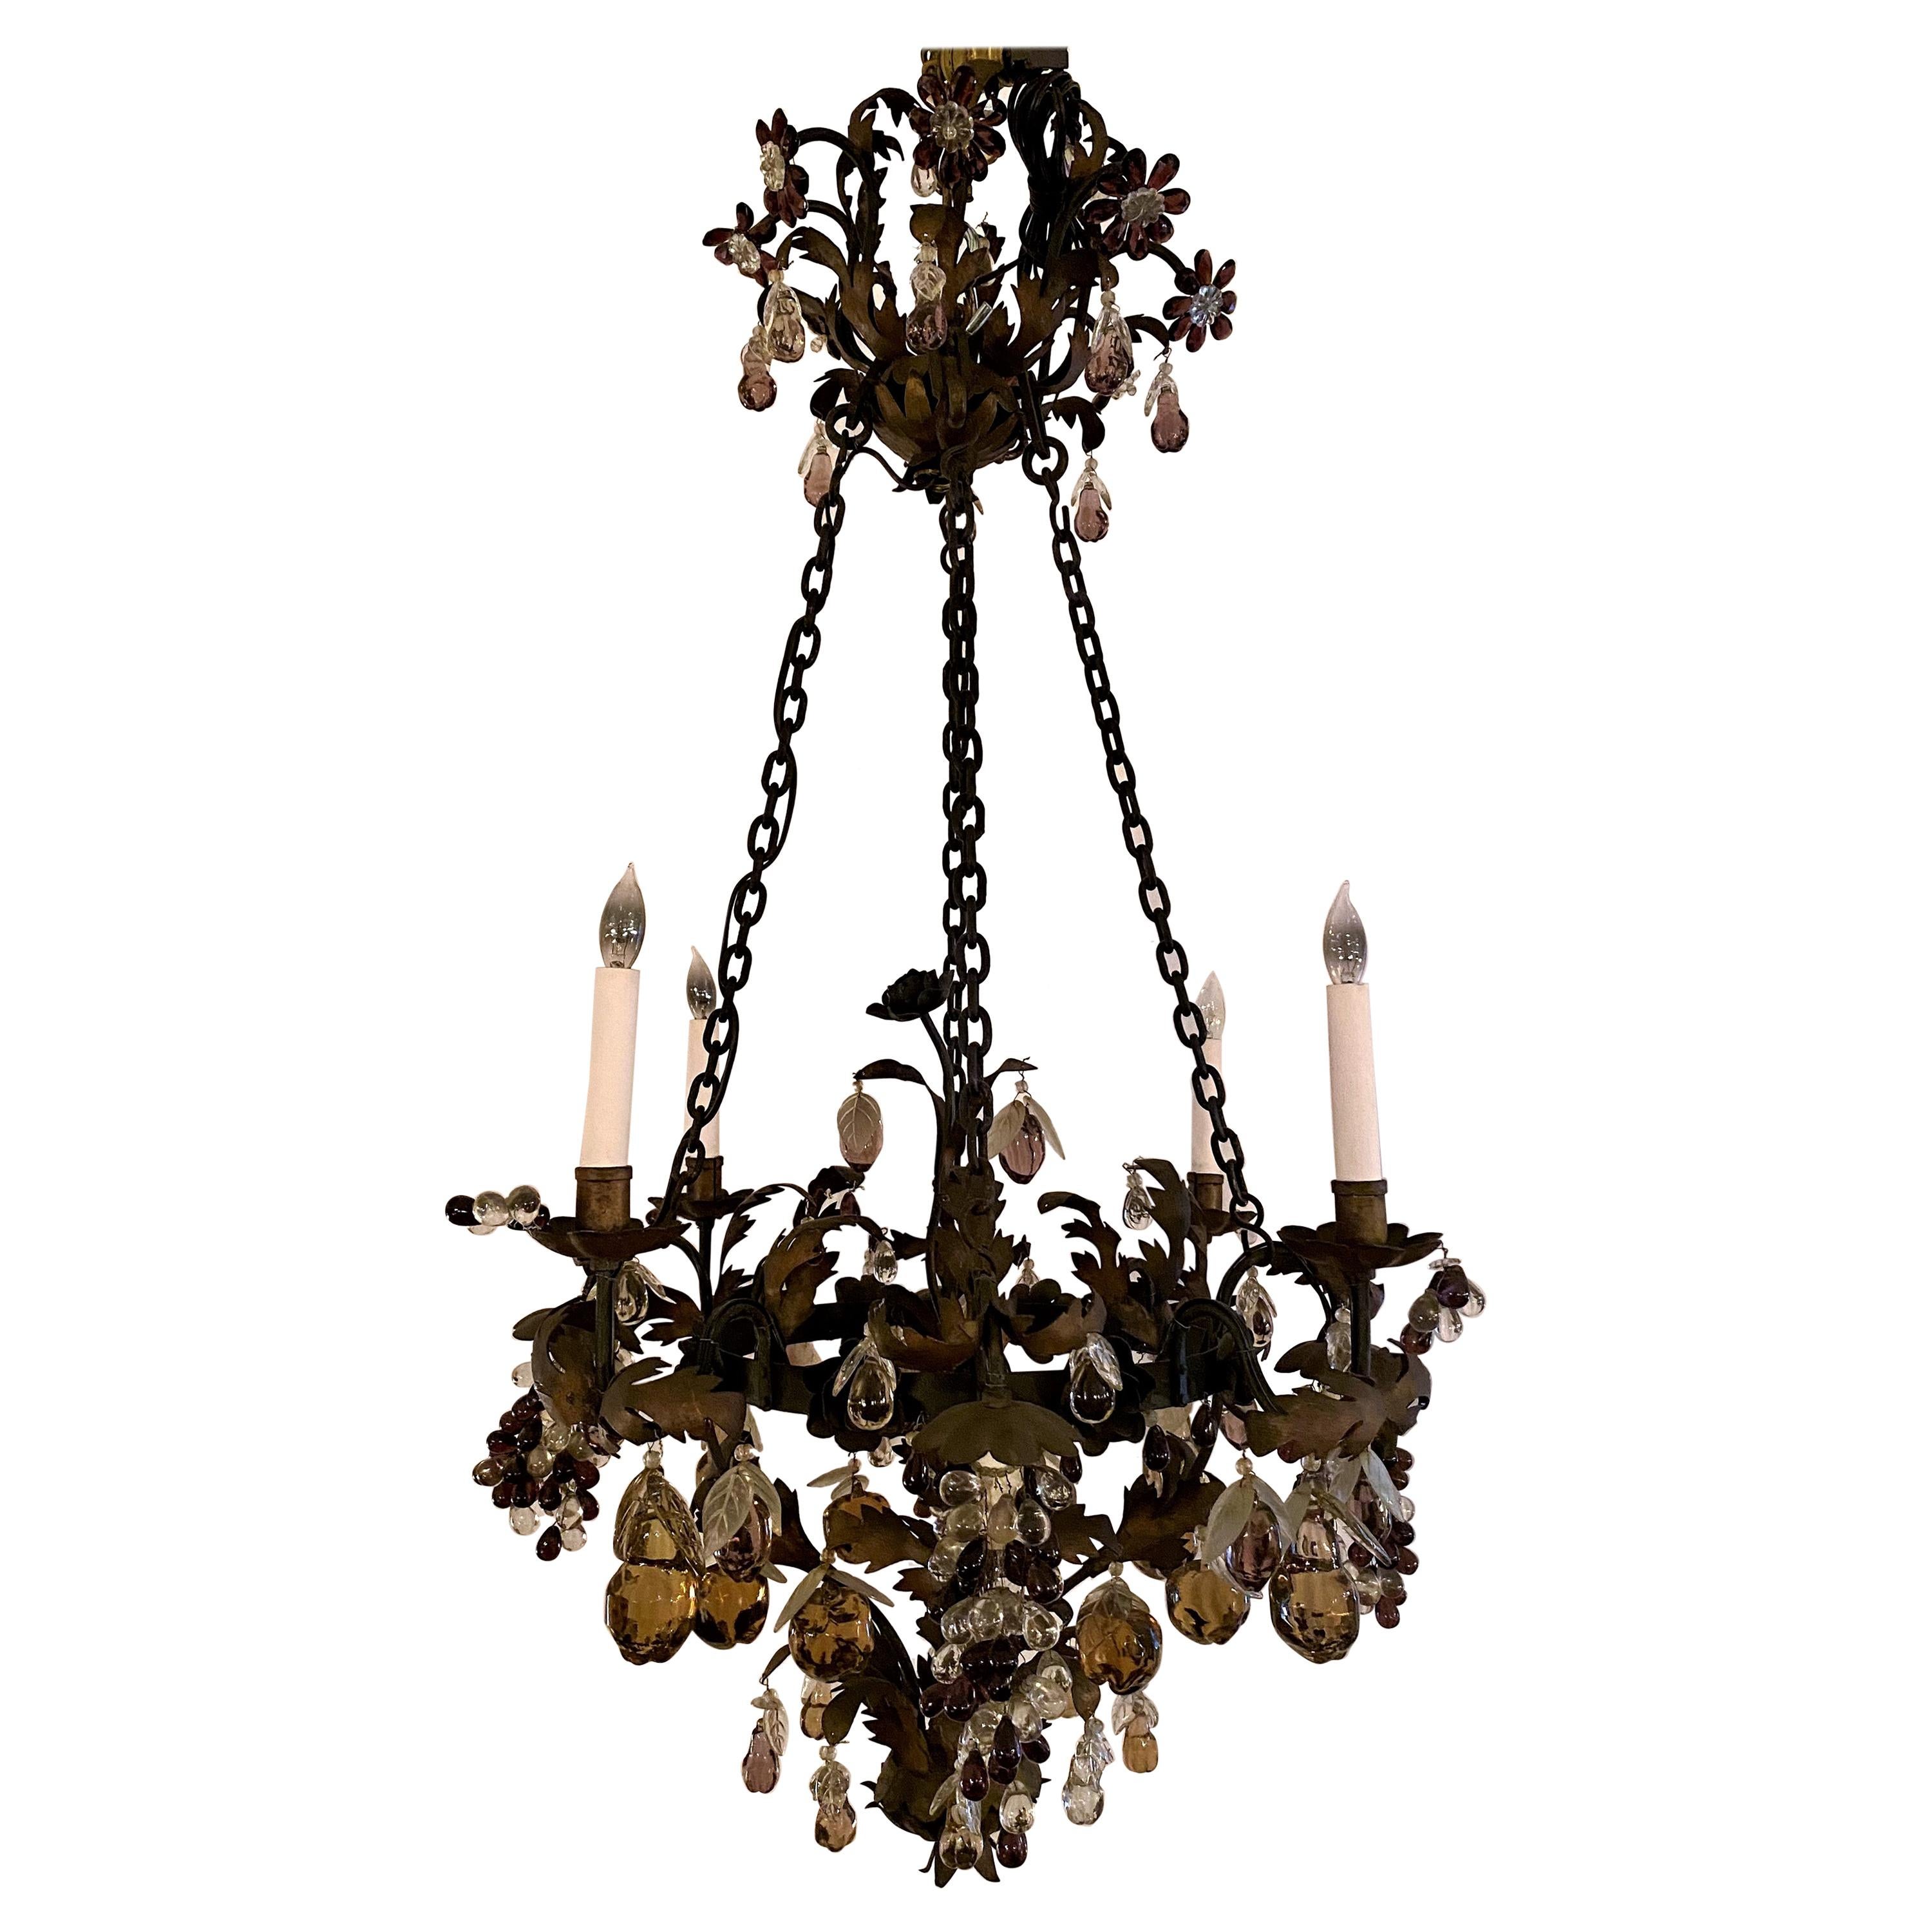 Antique French Baccarat Multicolored Crystal & Tole Chandelier, circa 1820-1840